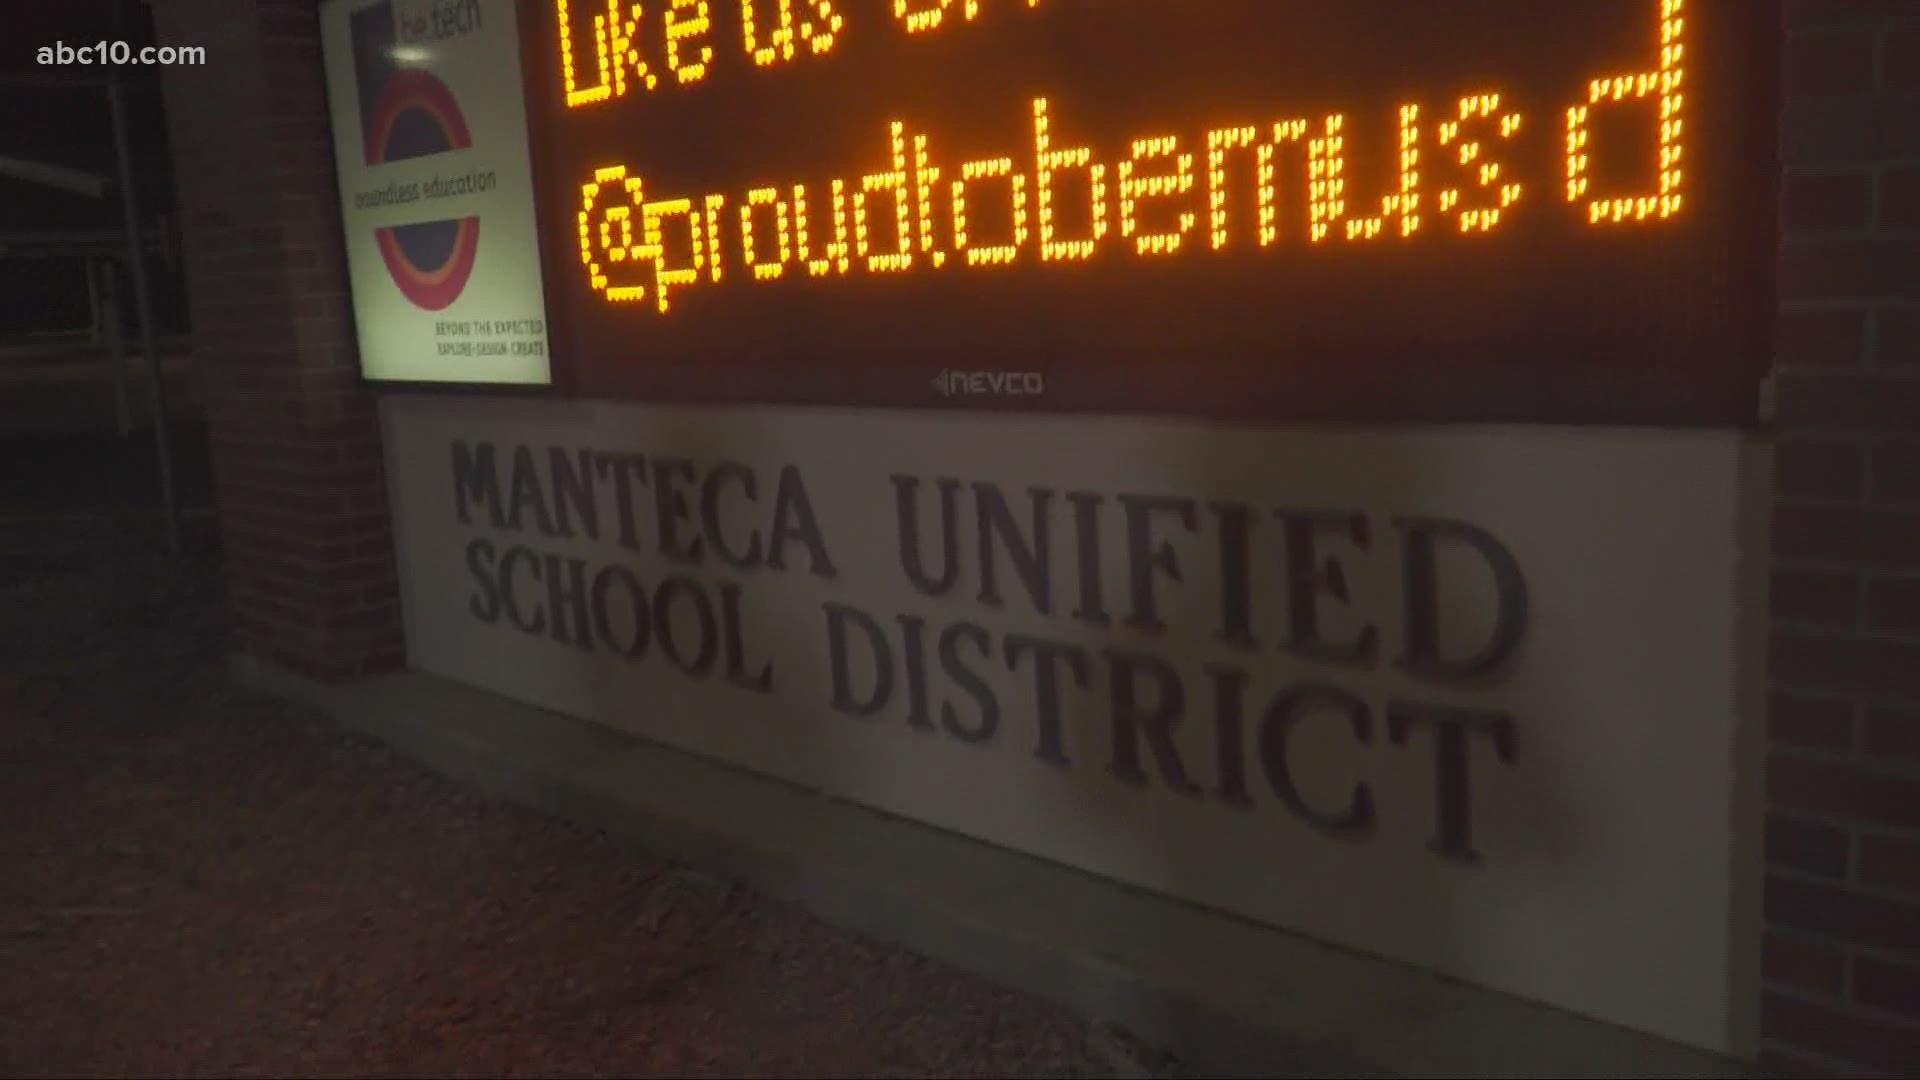 As the school year begins, the Manteca teachers' union and school district have been countering each other point for point over worker protections and safety.